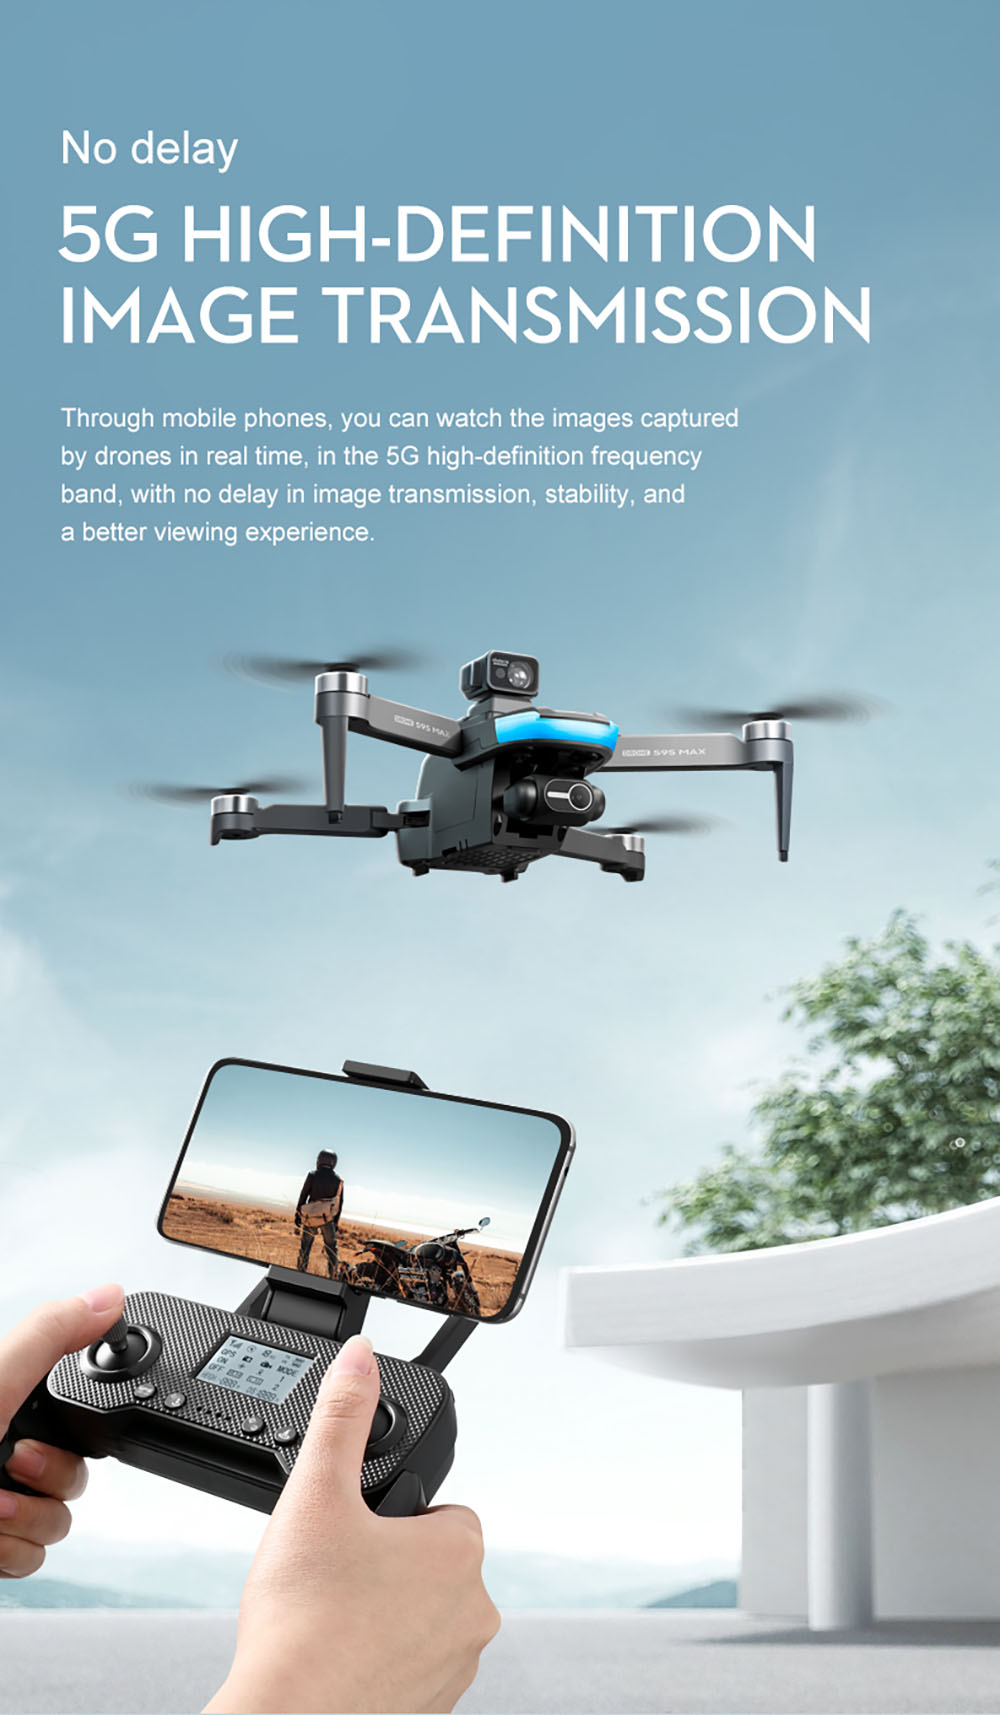 LSRC S9S GPS 5G WiFi FPV with 2.7K ESC HD Camera 2-Axis Mechanical Gimbal 360° Obstacle Avoidance Brushless 218g Foldable RC Drone Quadcopter RTF